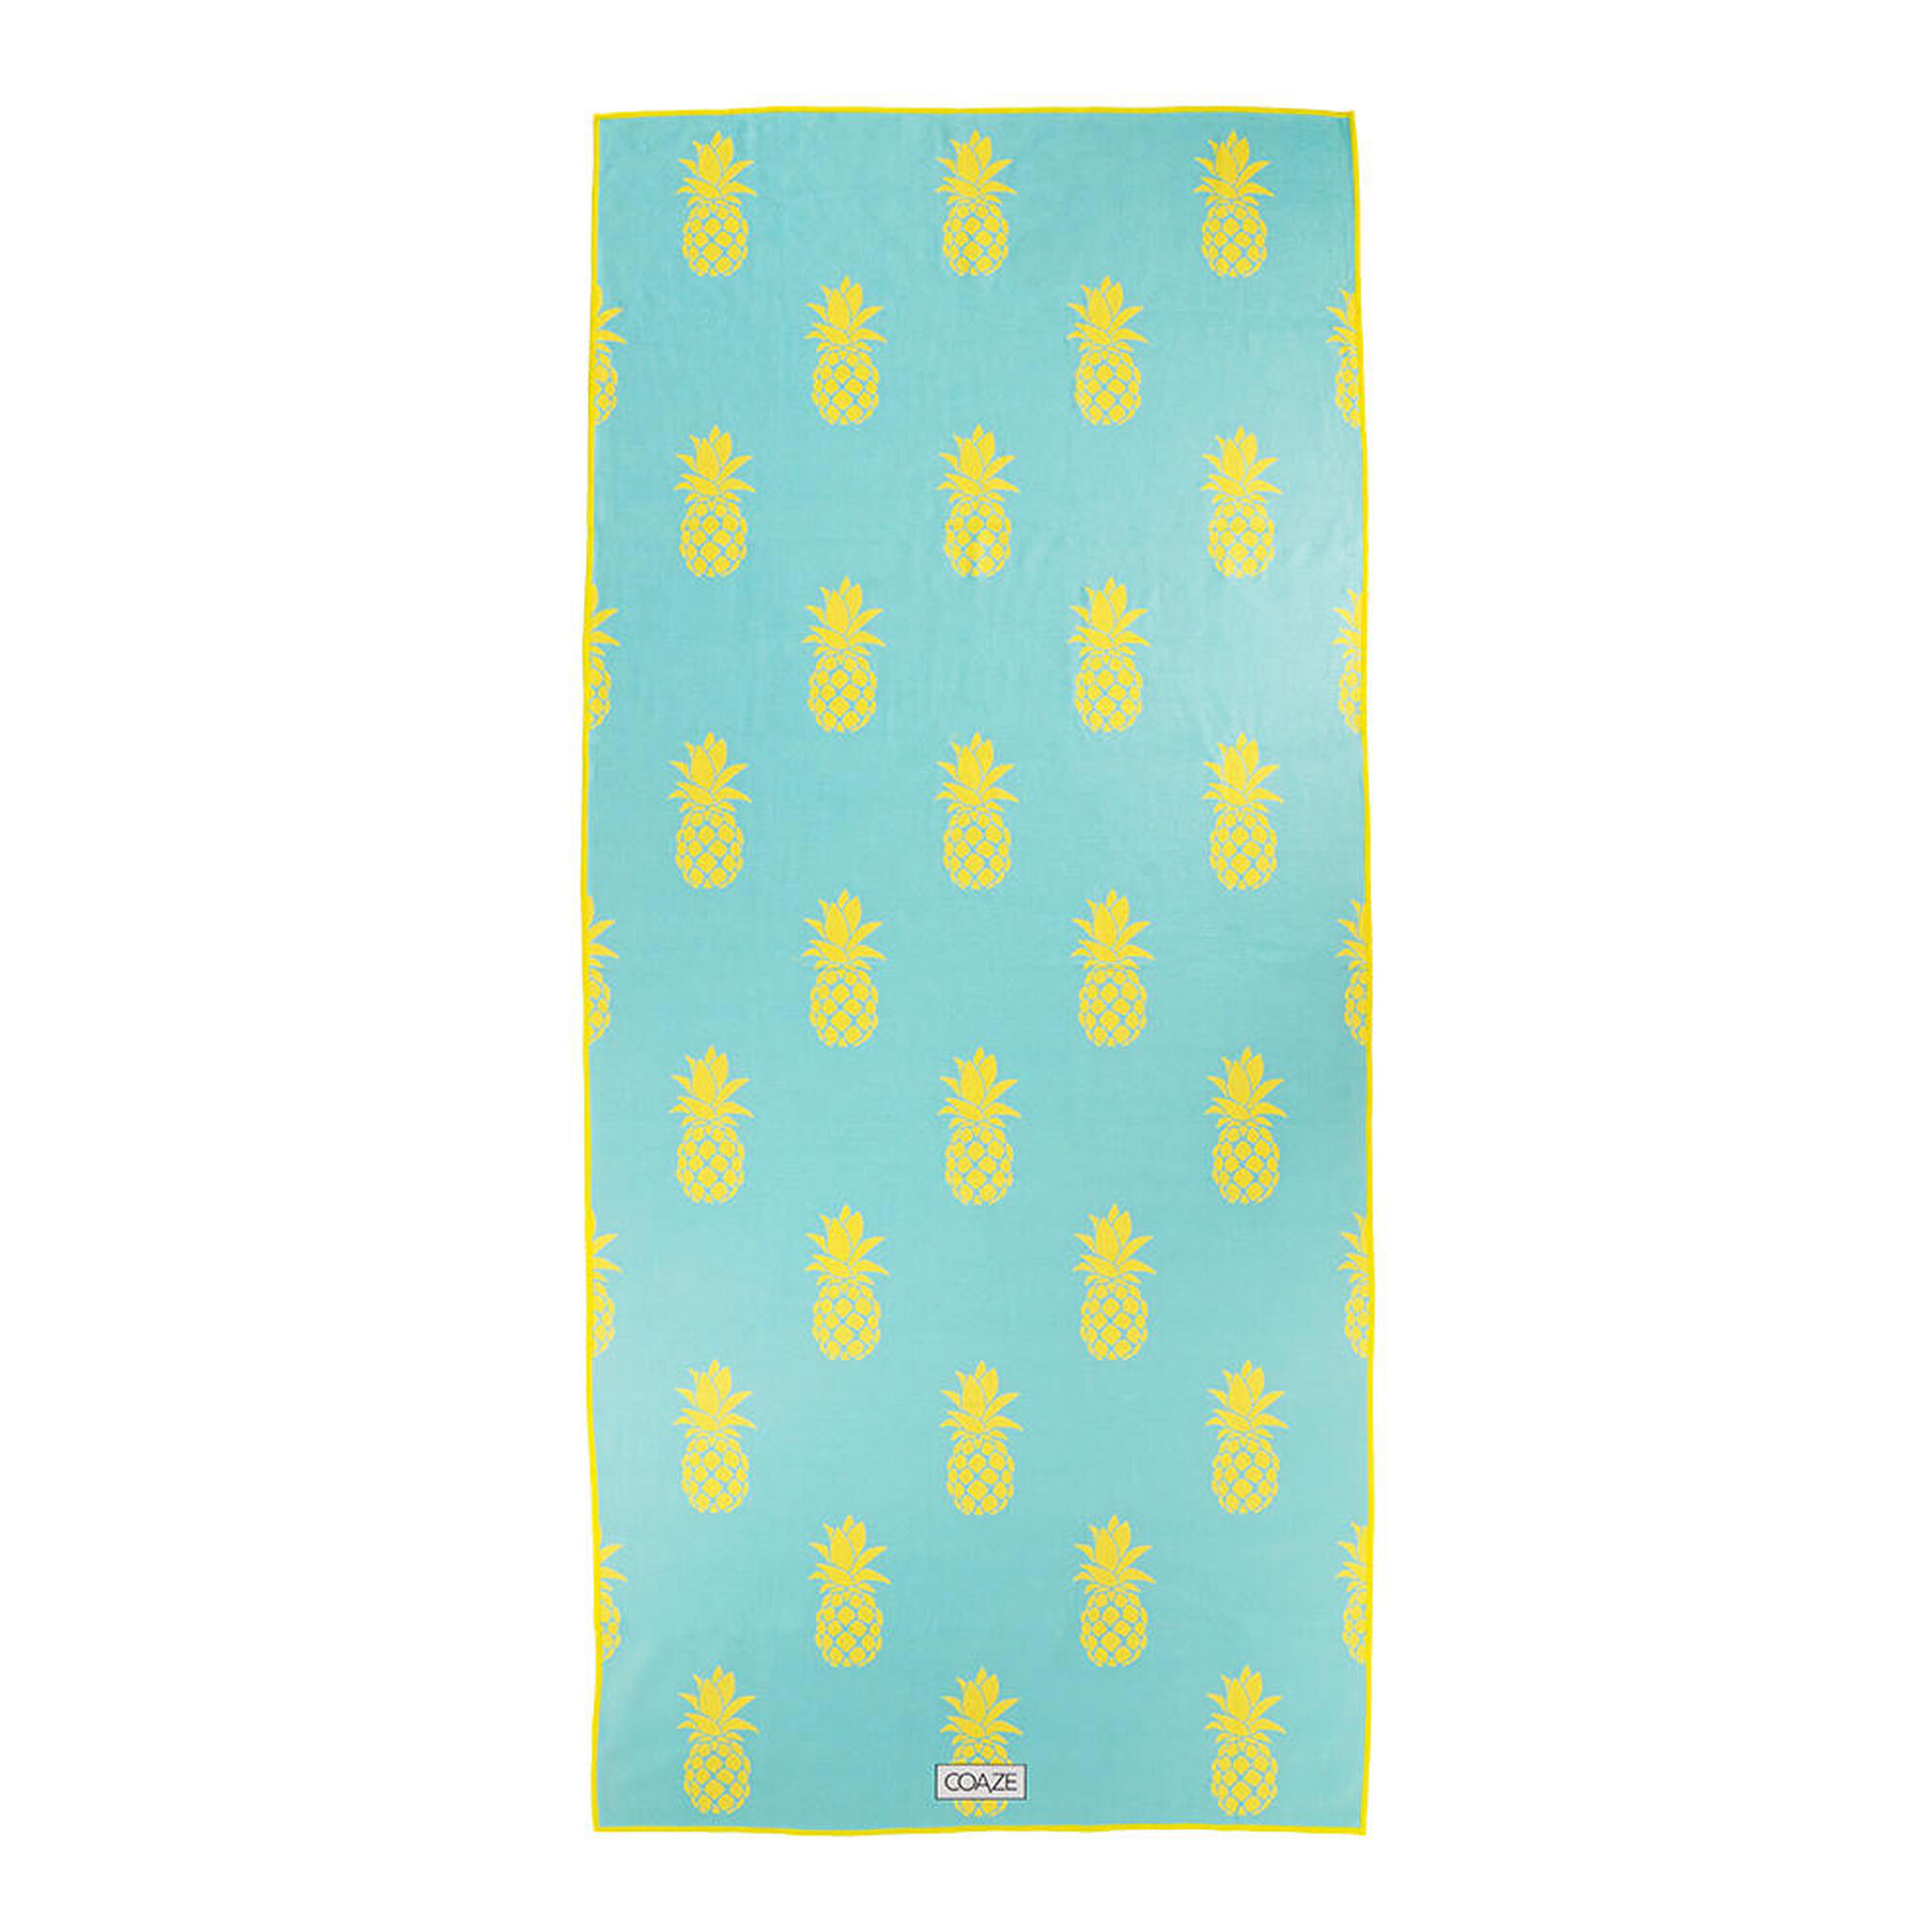 Unisex Sand Proof Sports Towel - Pineapple Express (Yellow/Blue)